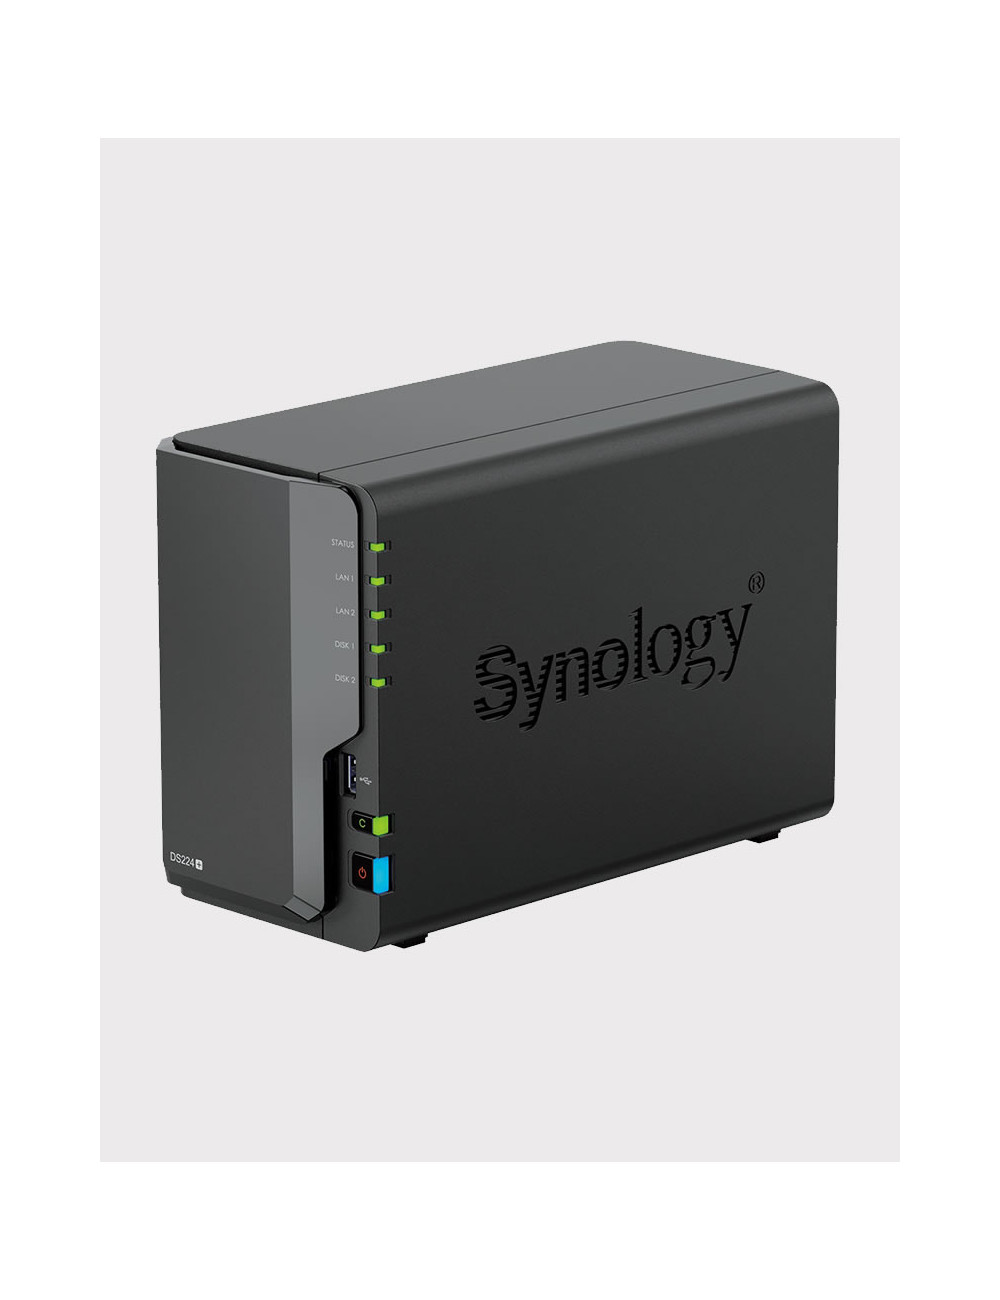 Synology DS218PLAY Serveur NAS WD RED 2To (2x1To)